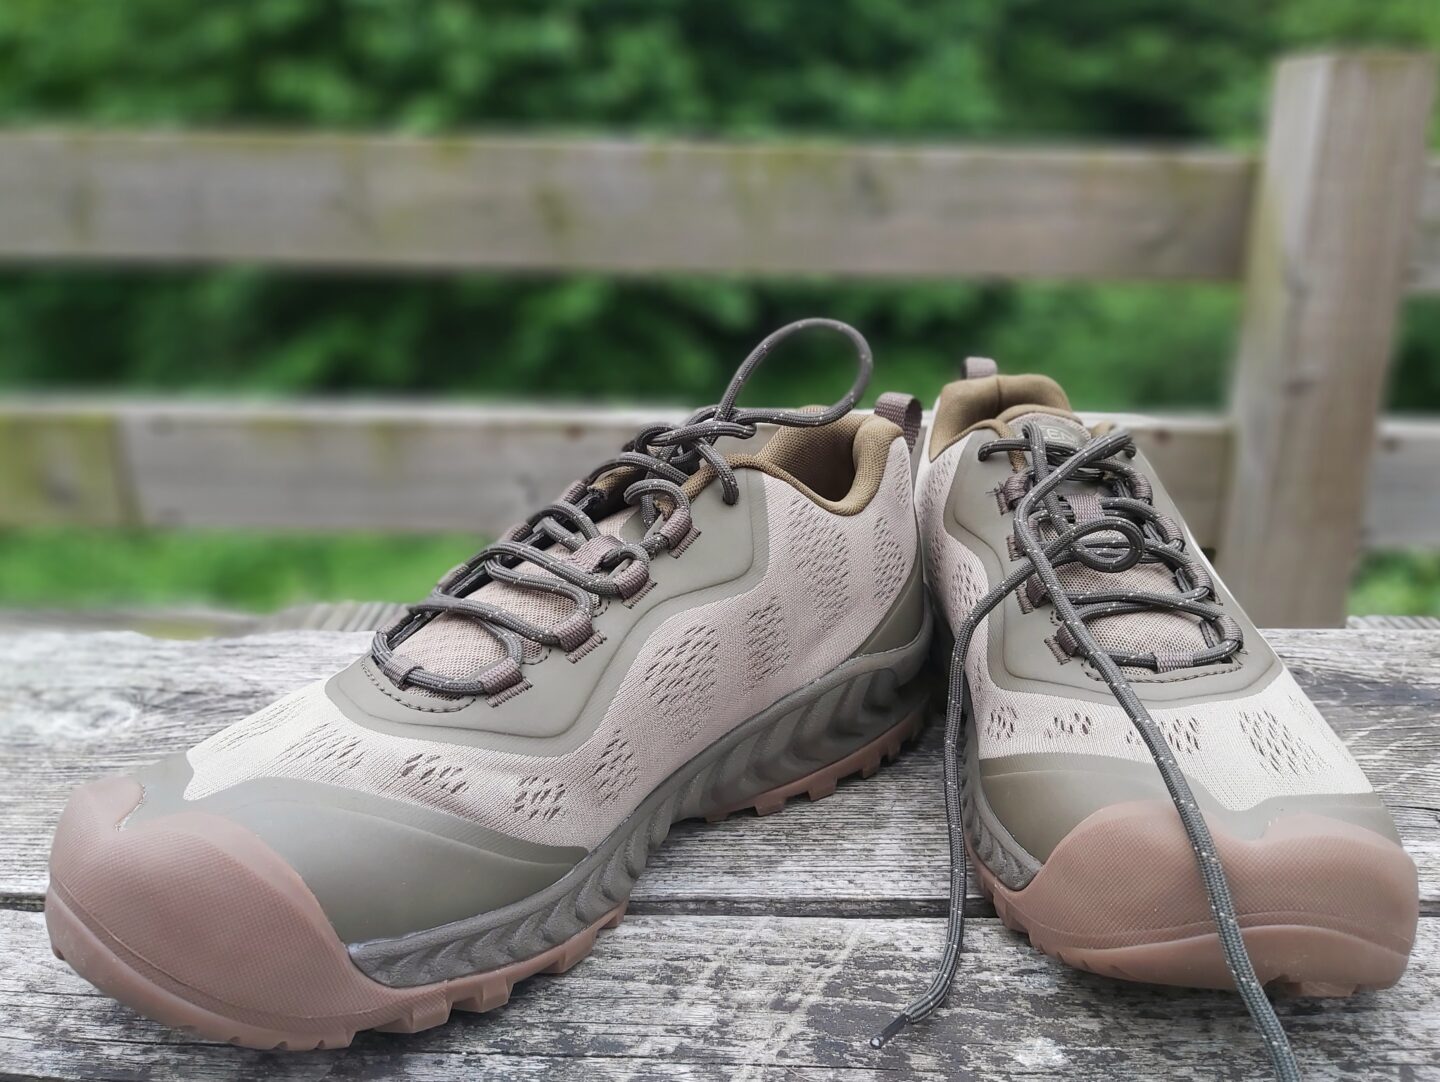 hiking trainers that would make ideal gifts for hikers displayed outside on a wooden backdrop with blurred green trees in background